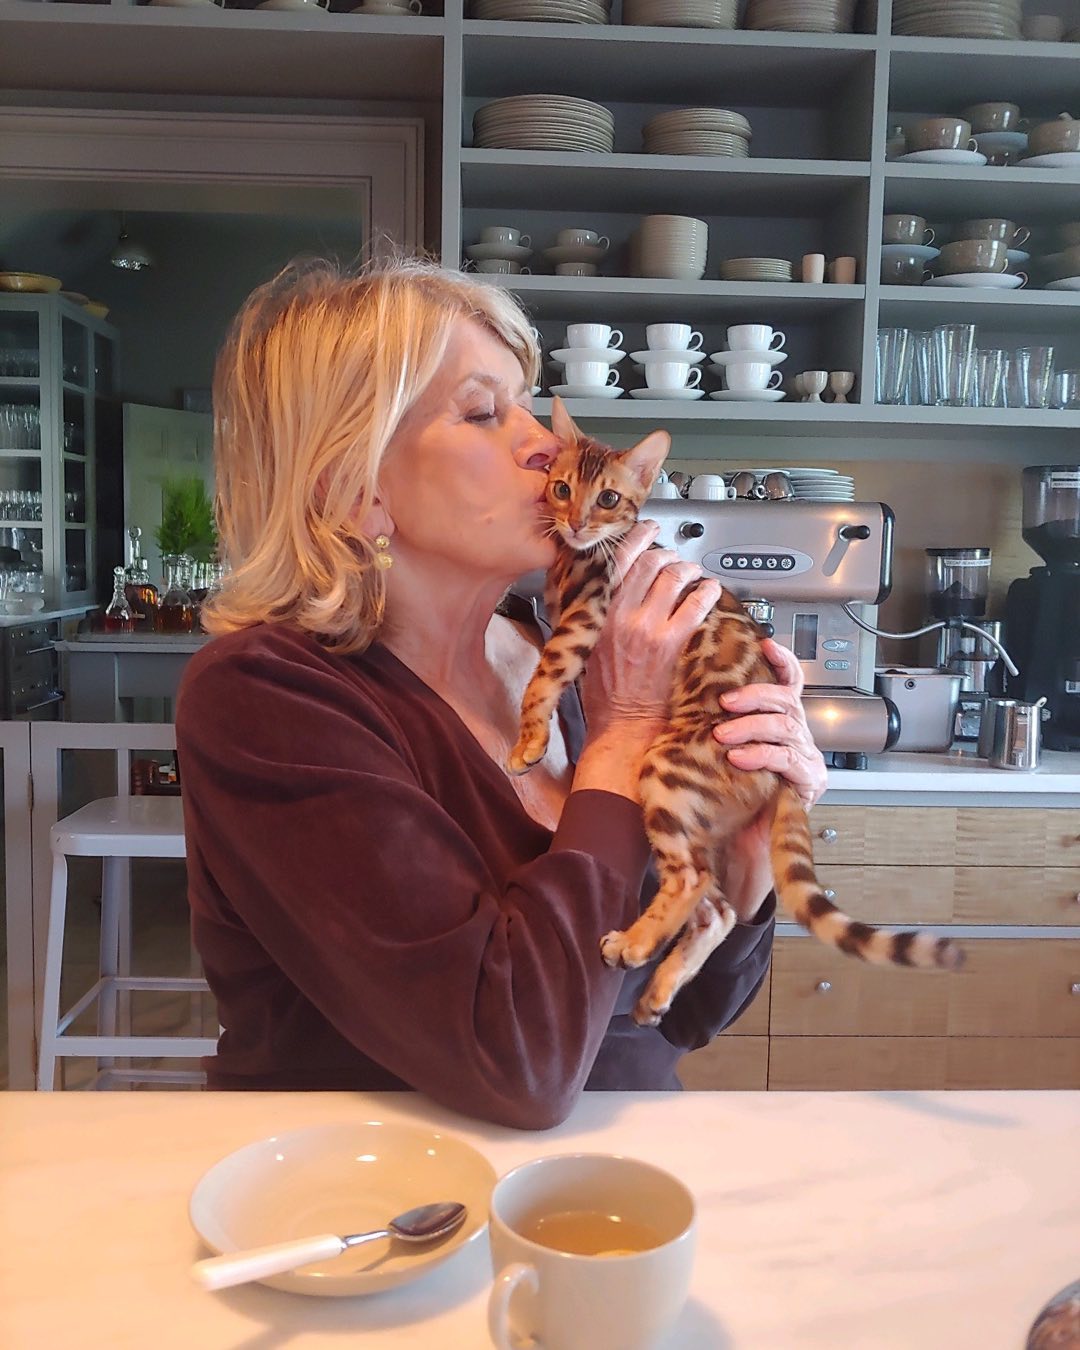 Martha Stewart and one of her adorable cats